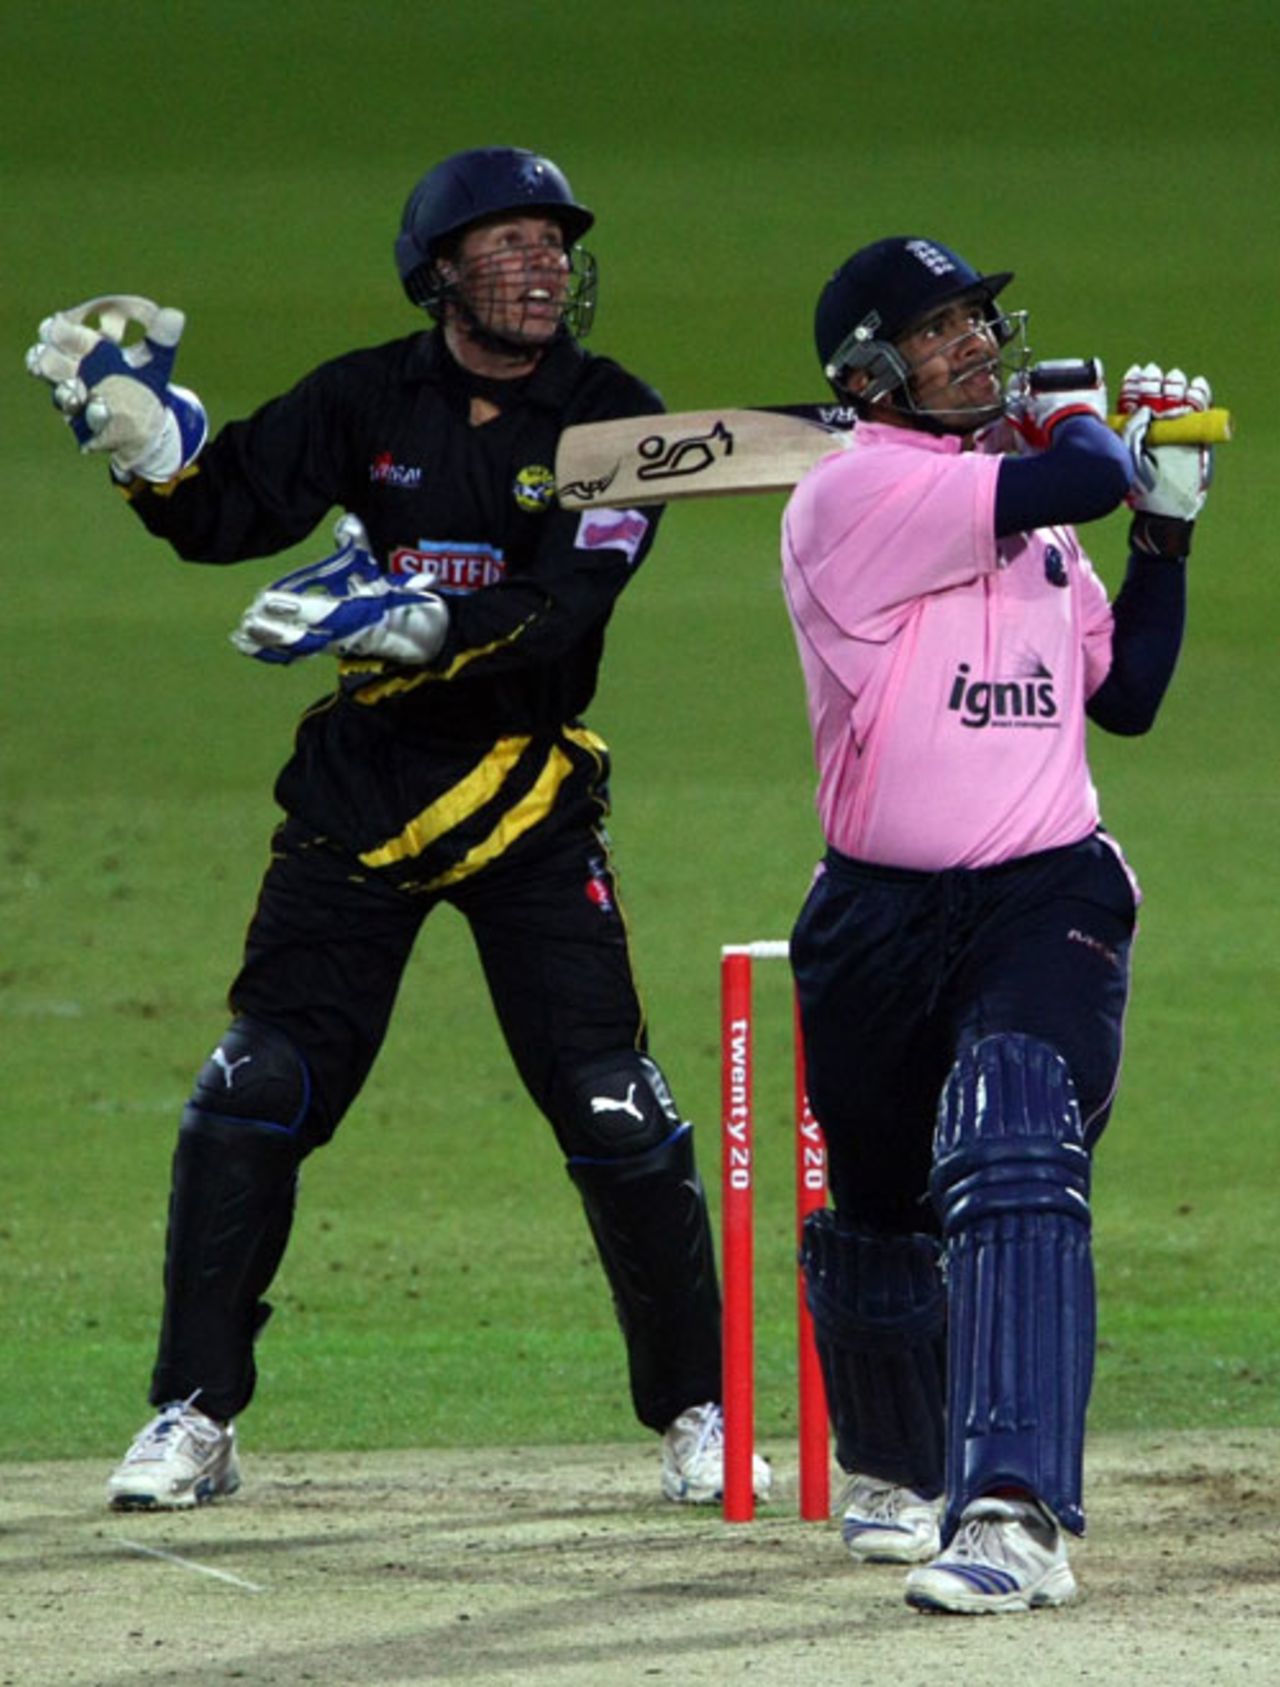 Owais Shah thumps a six as Lord's' new floodlights make their debut, Middlesex v Kent, Twenty20 Cup, Lord's, May 27, 2009